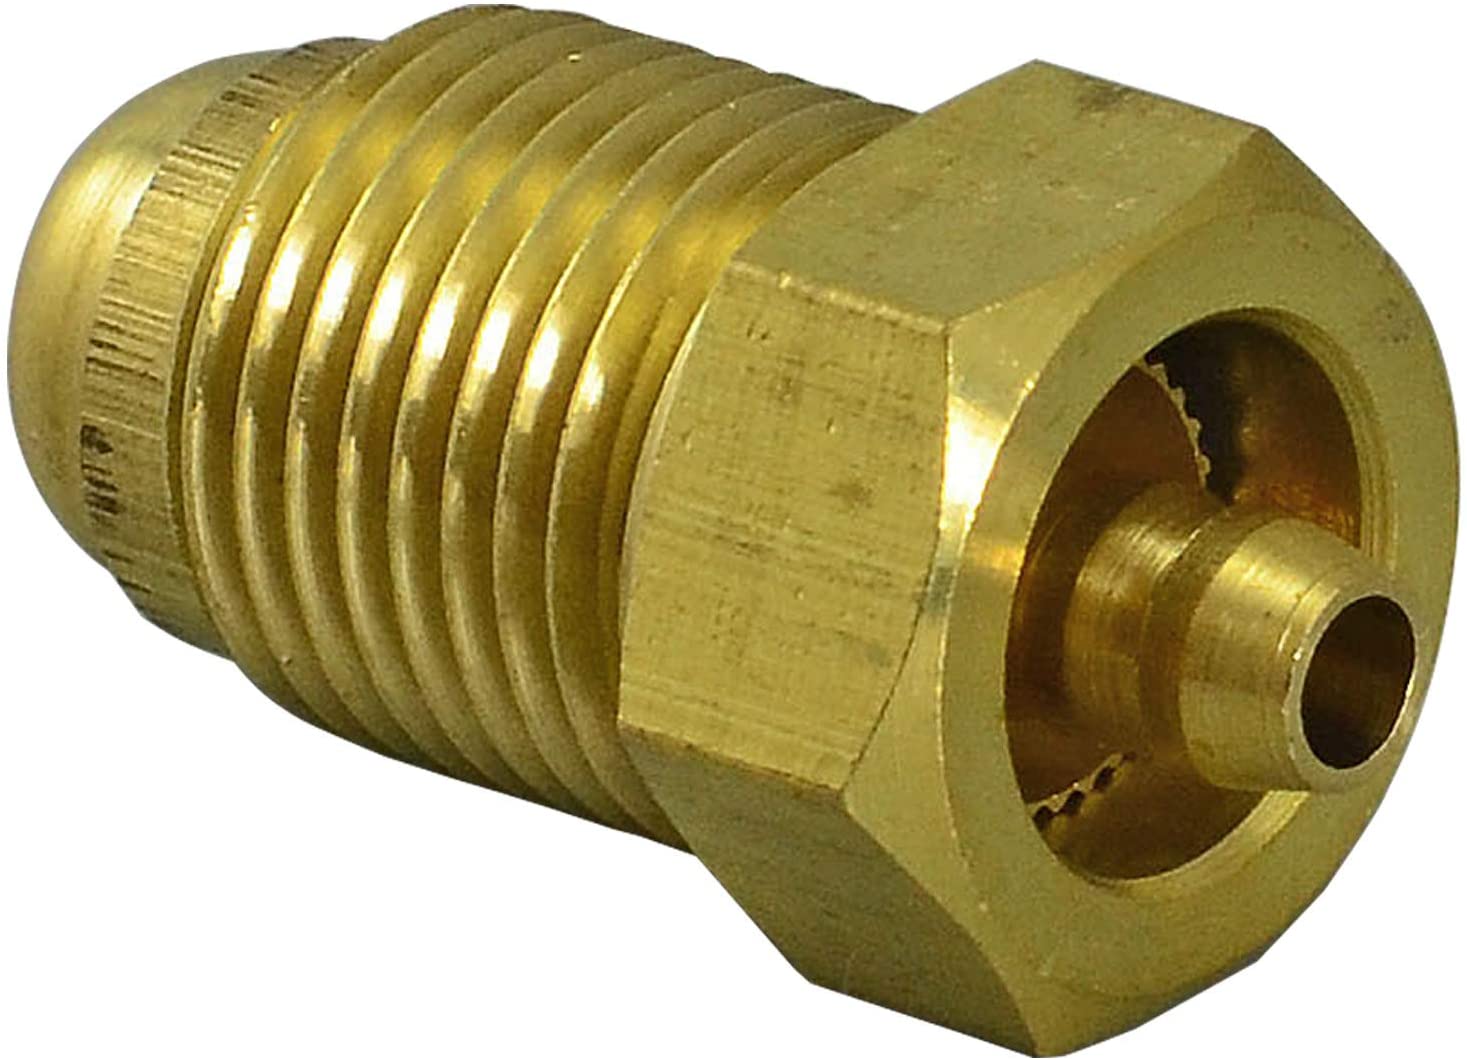 TIG Welding Torch Fitting Connector Adapter (Miller Gas Quick Hose Connector)